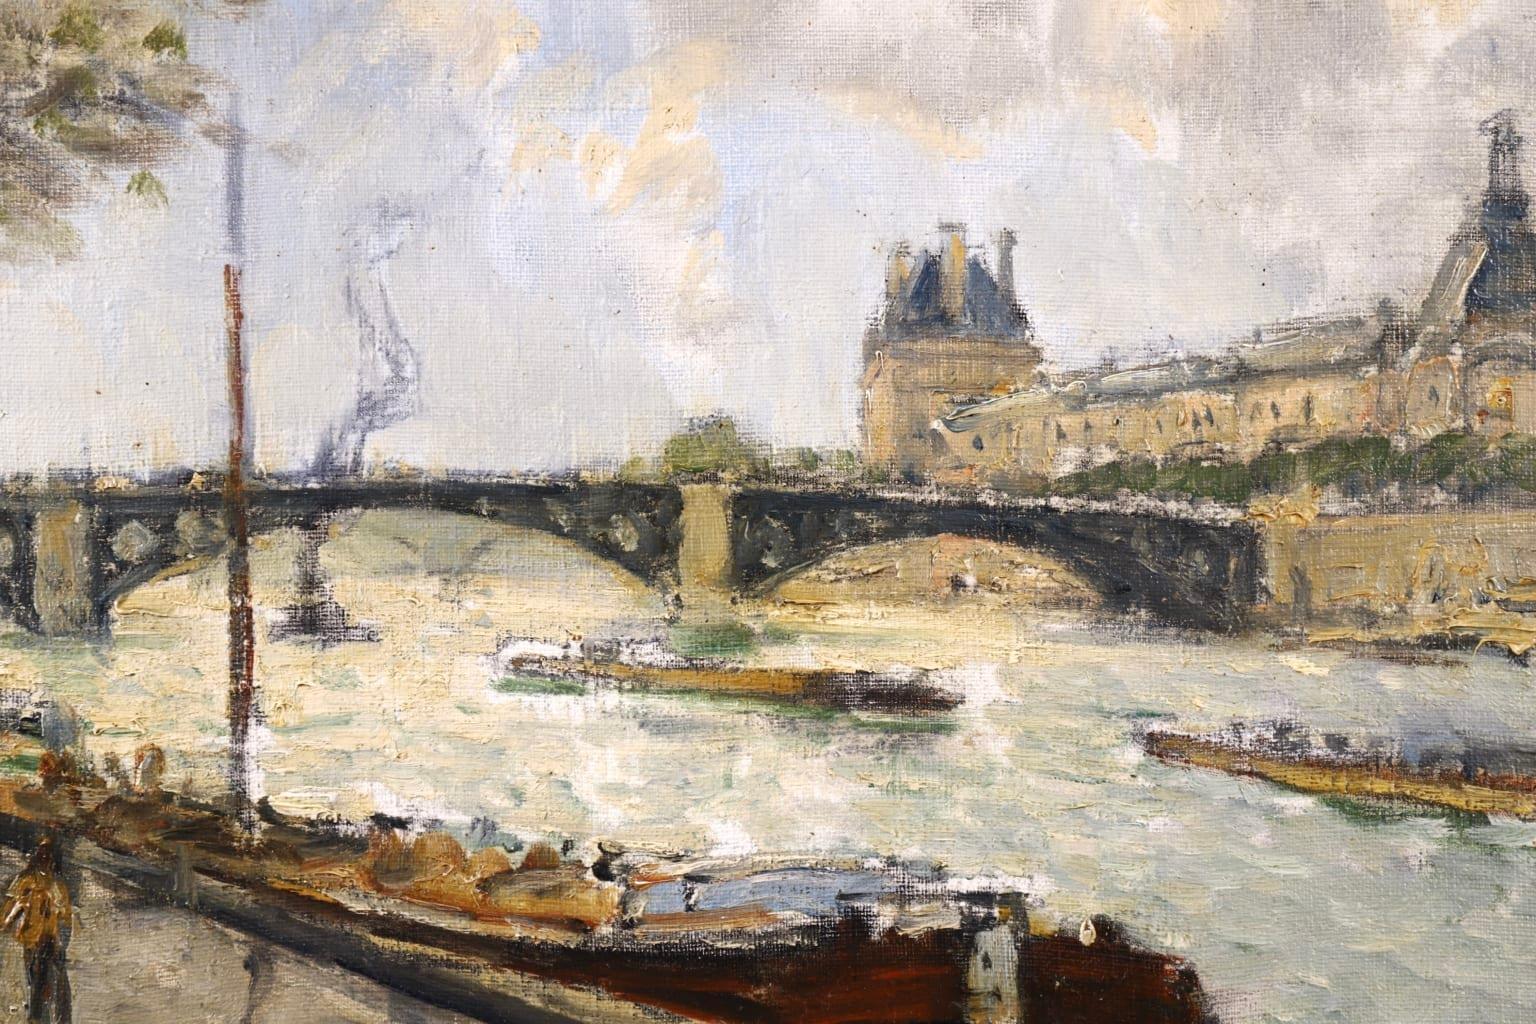 View of the Seine, Paris - Impressionist Oil, Riverscape by Frank Myers Boggs 5